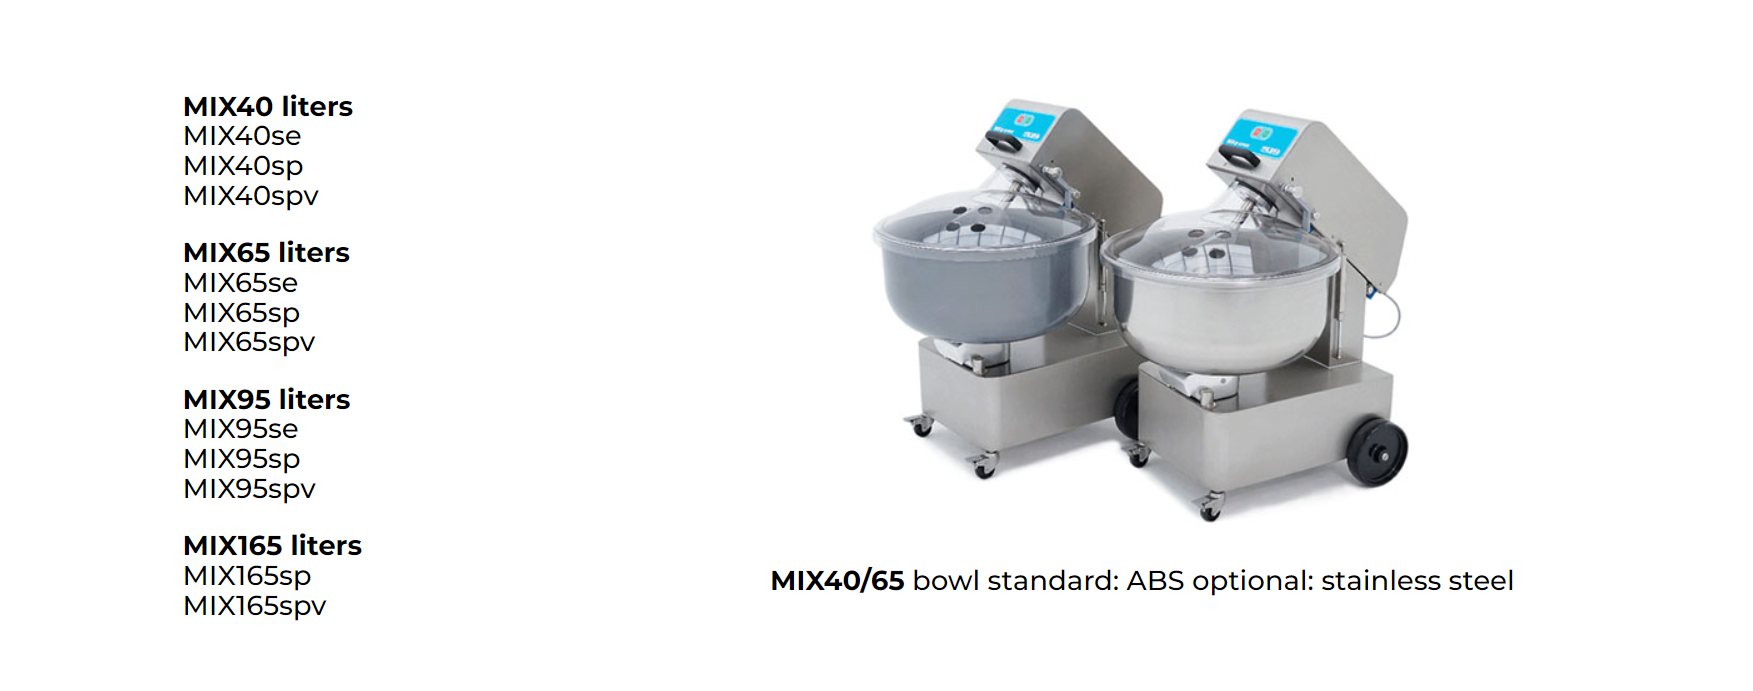 Two mixers are sitting next to each other on a white background.